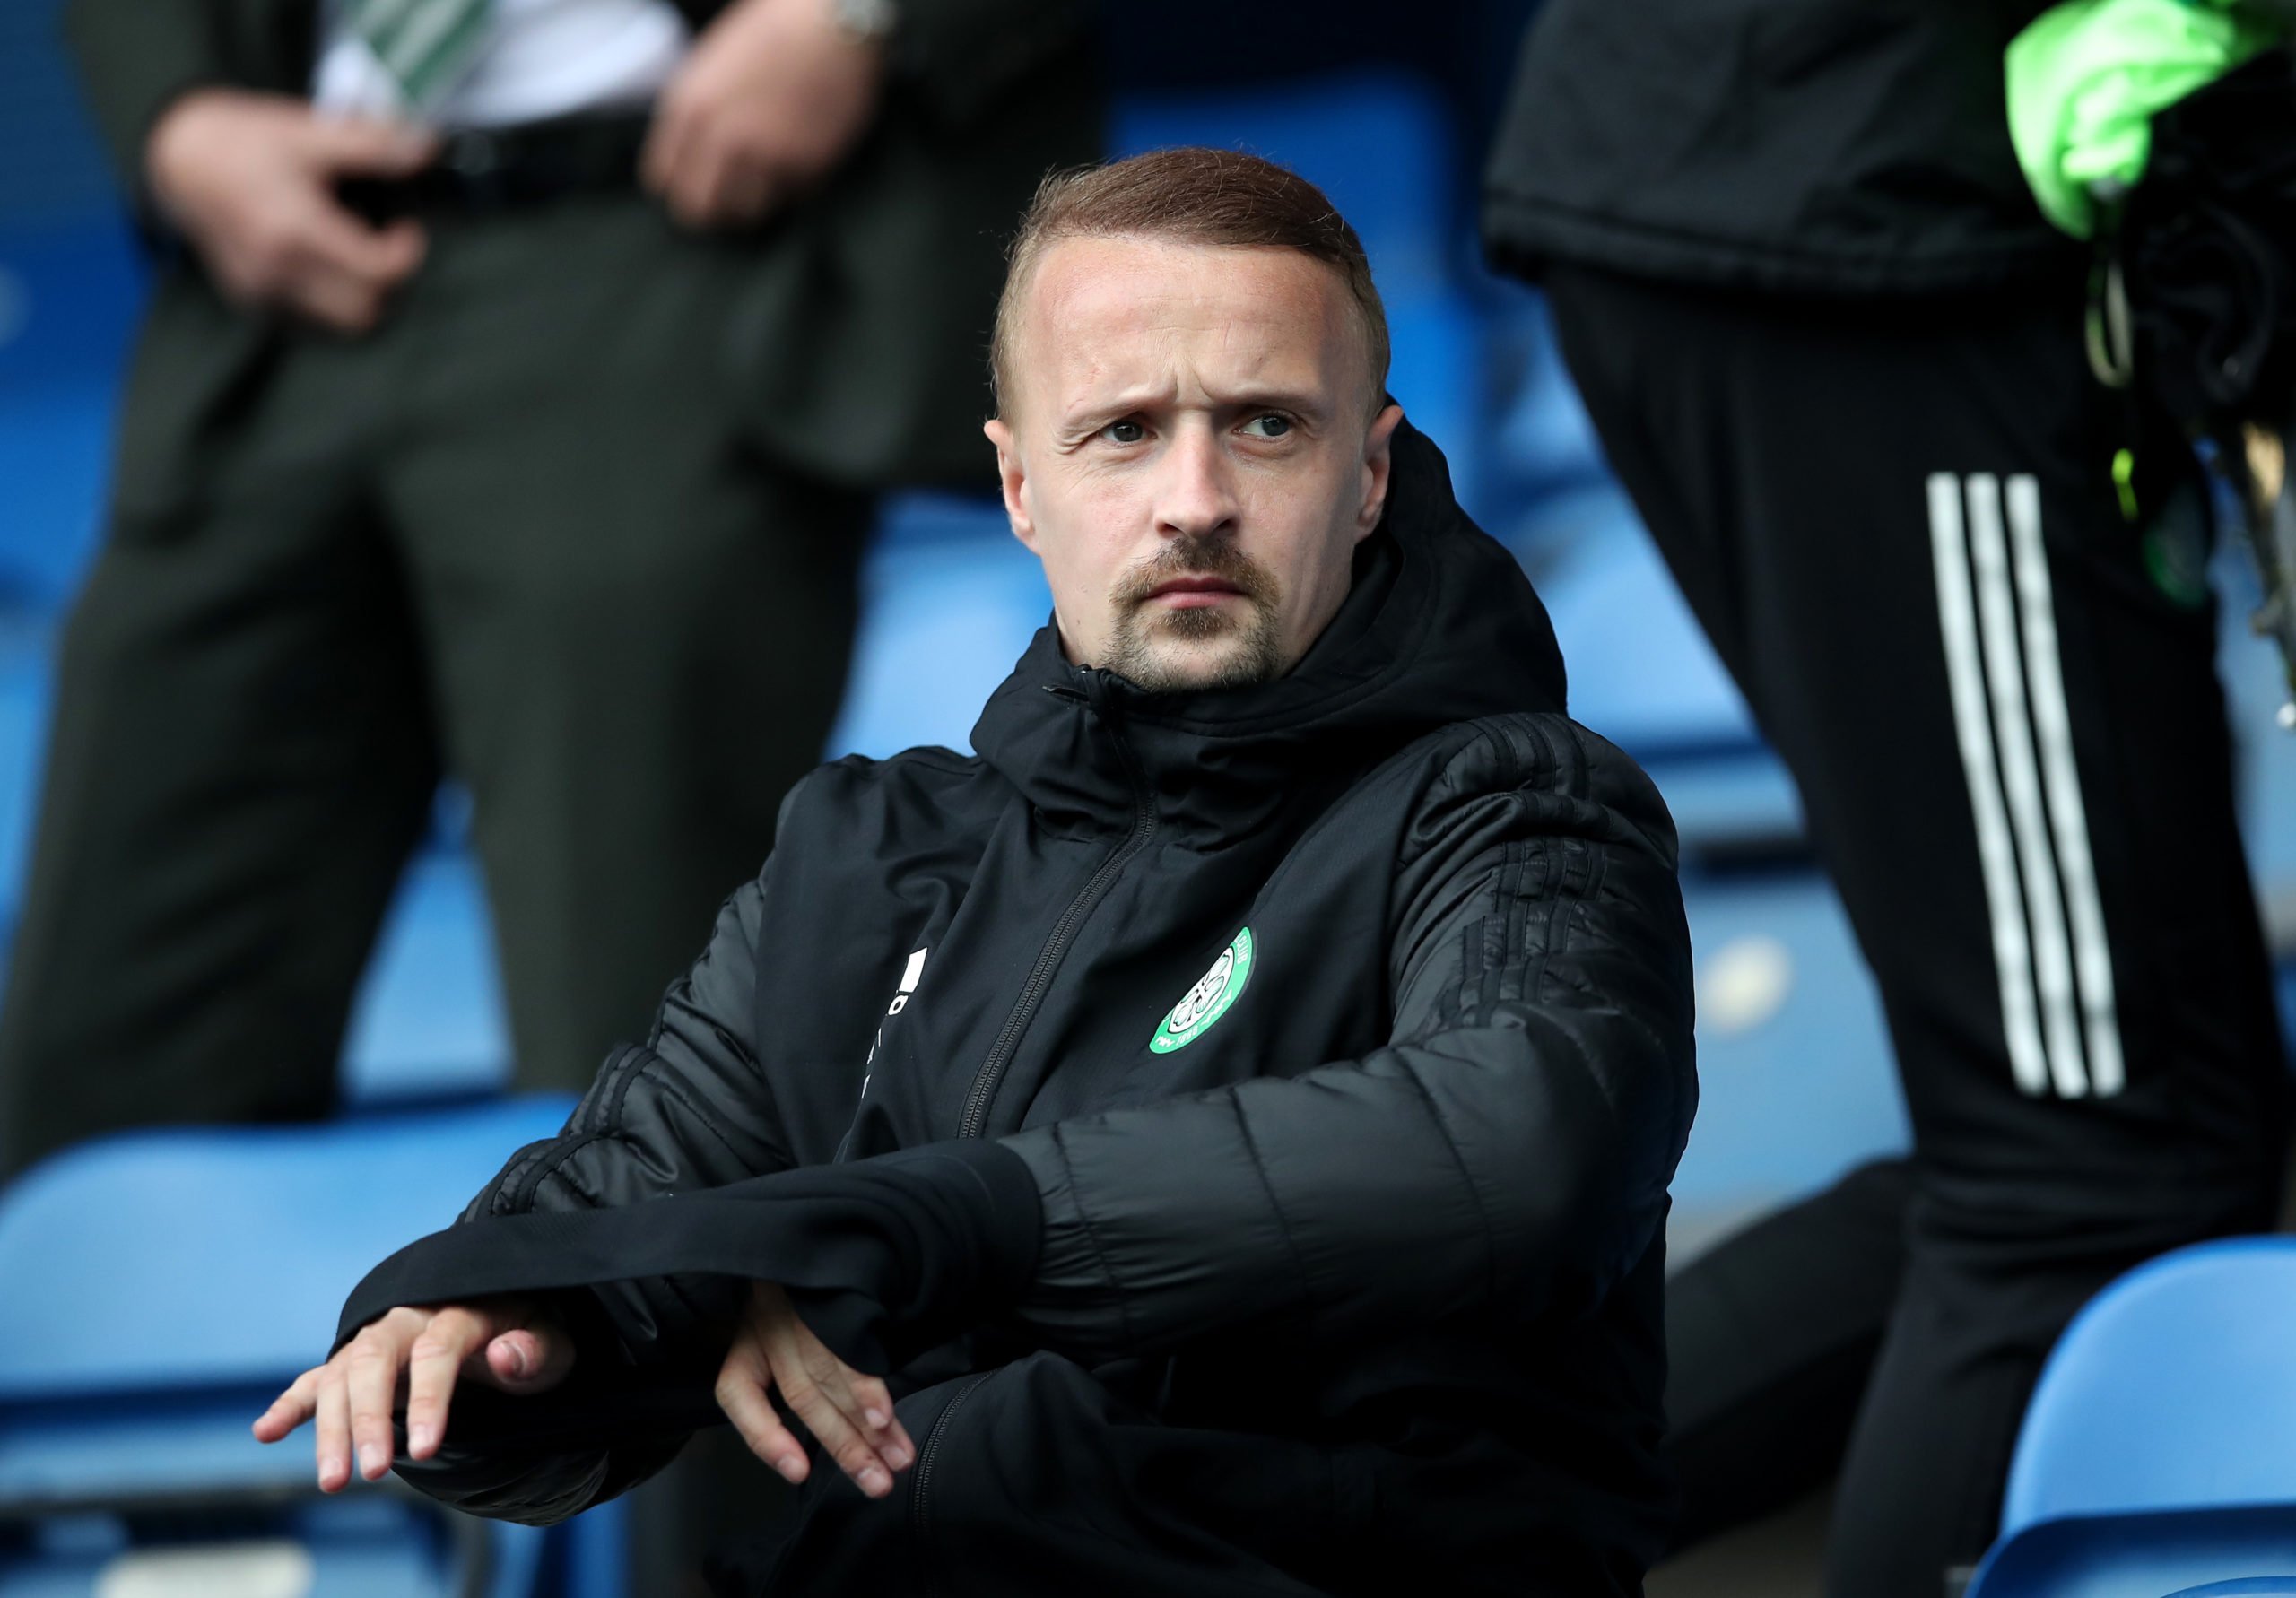 Celtic striker Leigh Griffiths says Ange Postecoglou is "keen" to keep him